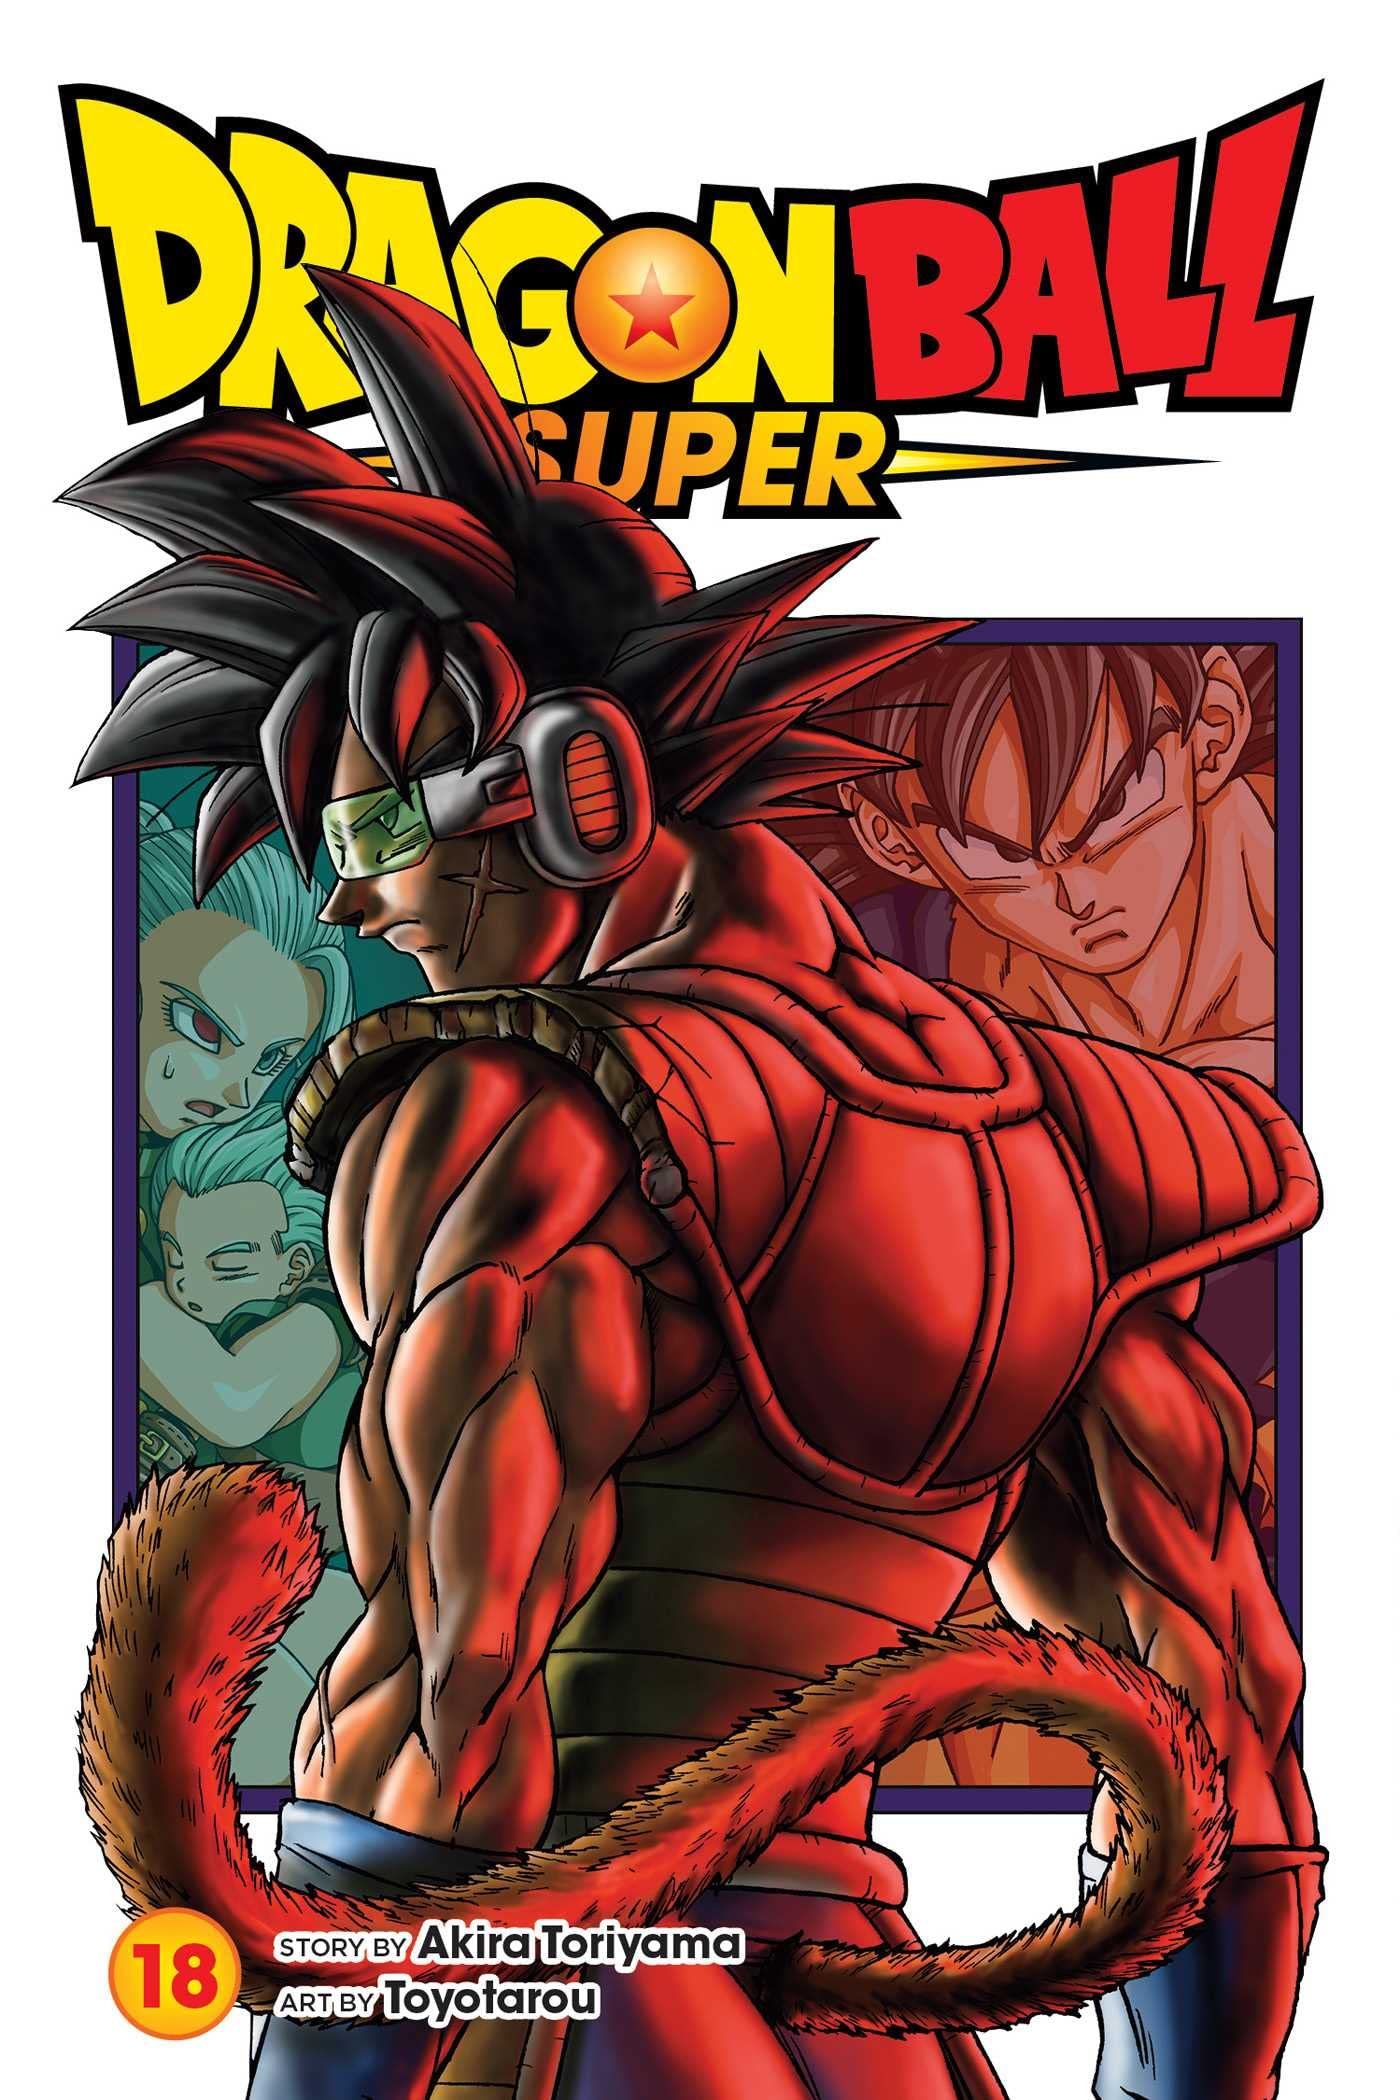 SUPER クロニクルス on X: Dragon Ball Super Manga Volume 21 releases on August 4.  Chapters: 89-92  / X